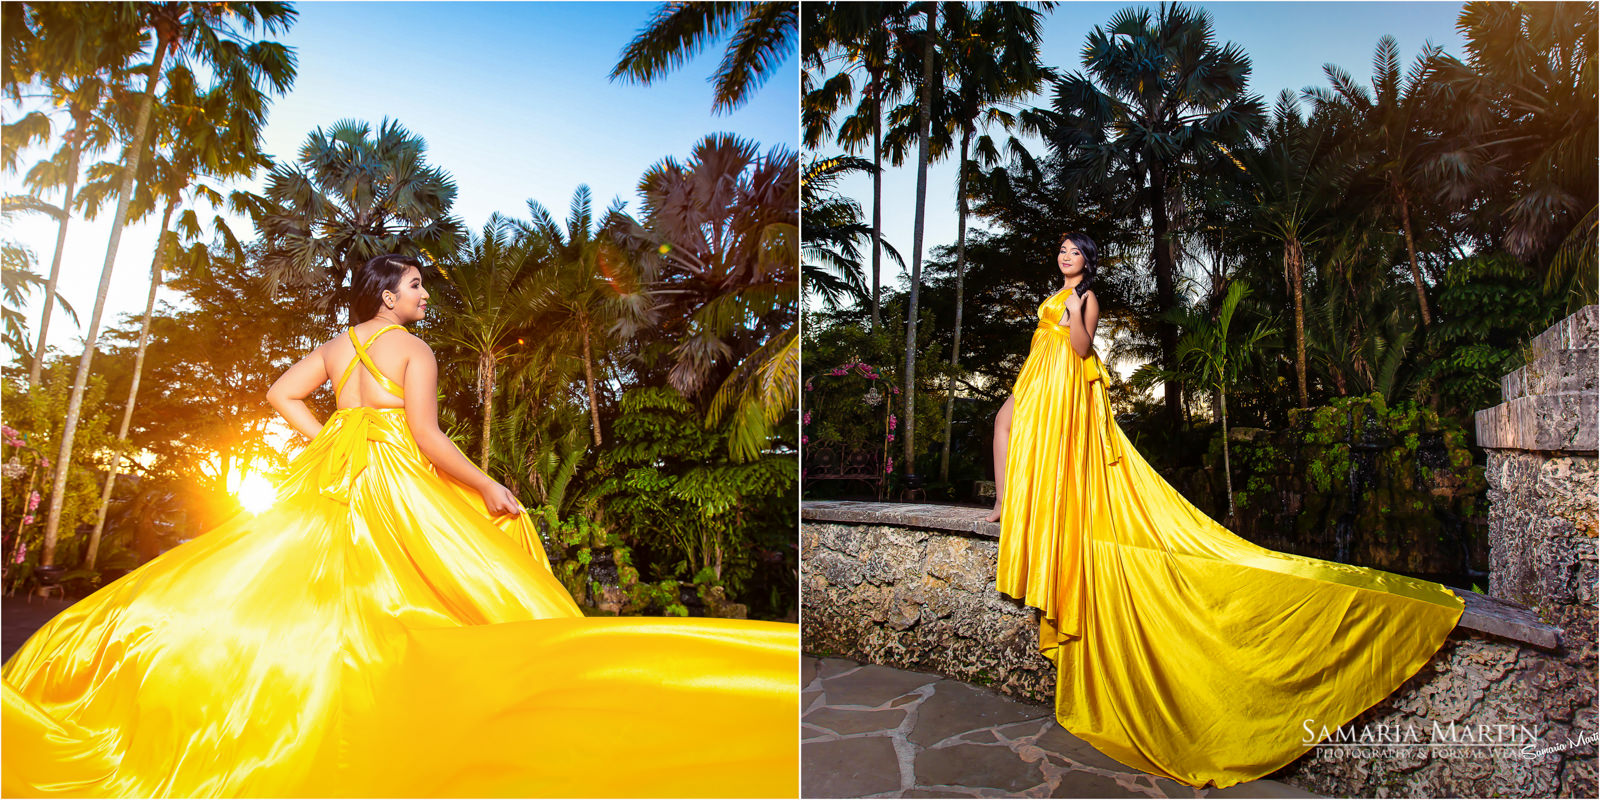 Quinceanera collection, quinceanera yellow dresses, quinceaneras in Villa Turqueza, sweet 15, Samaria Martin photography